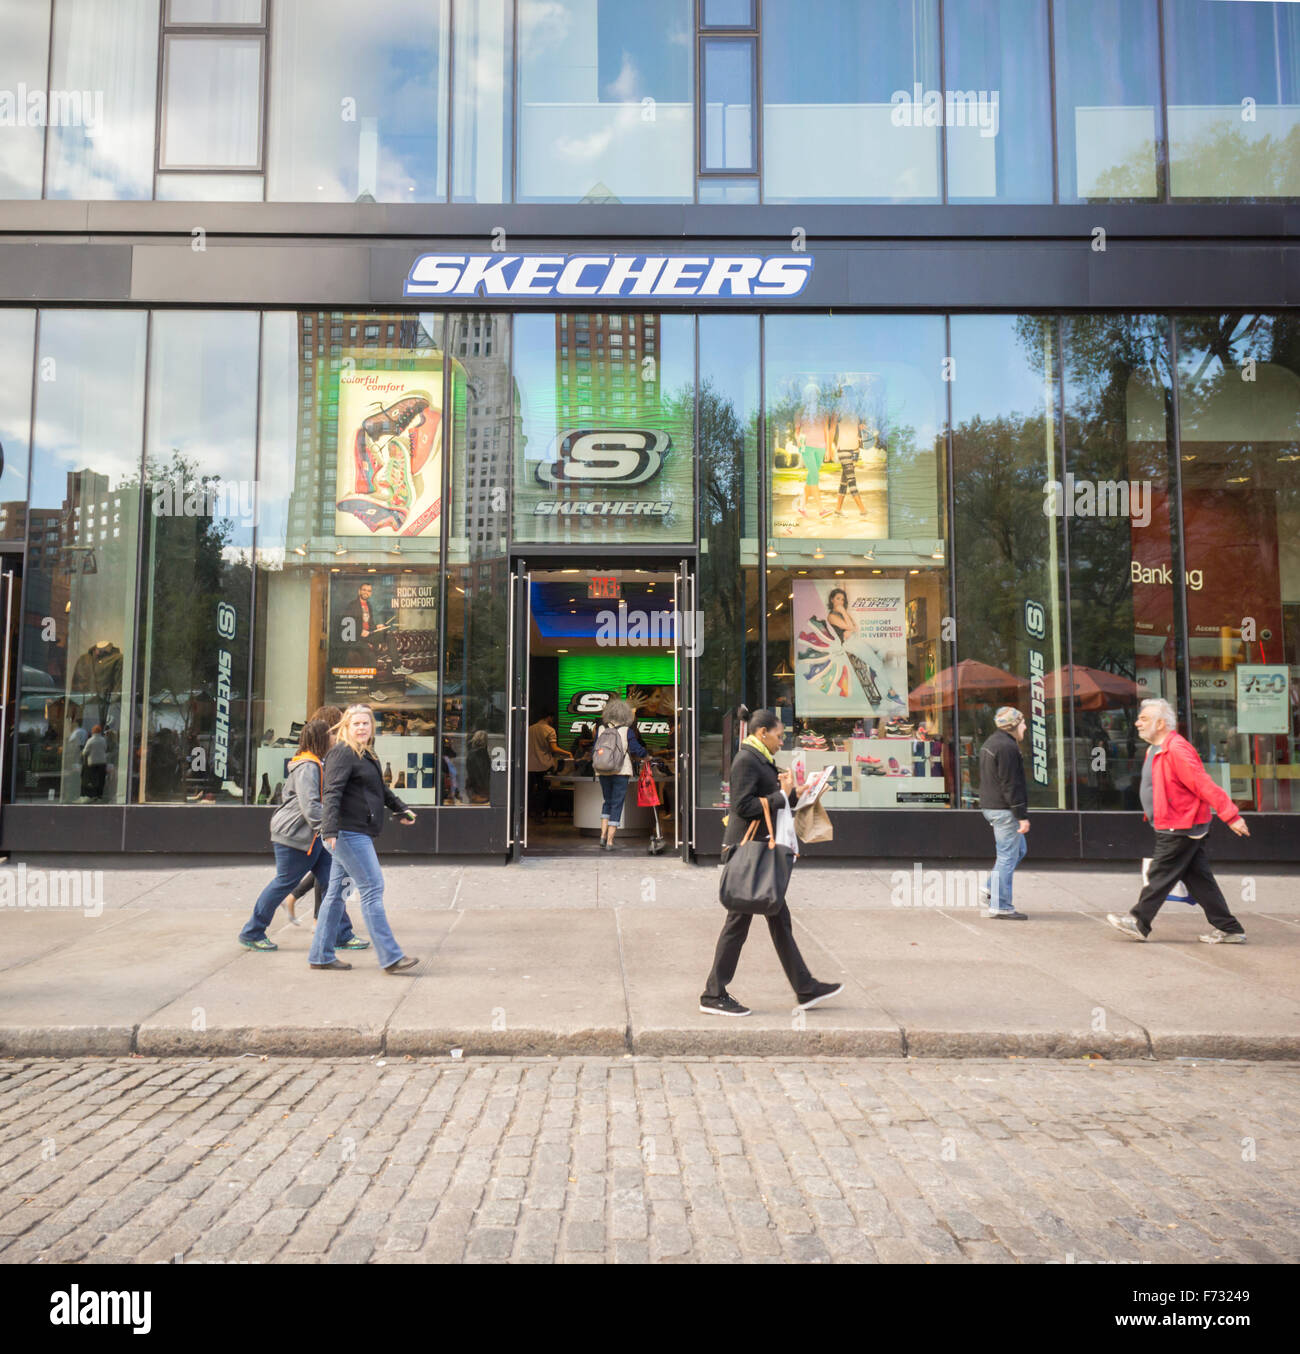 Skechers Shoes High Resolution Stock 